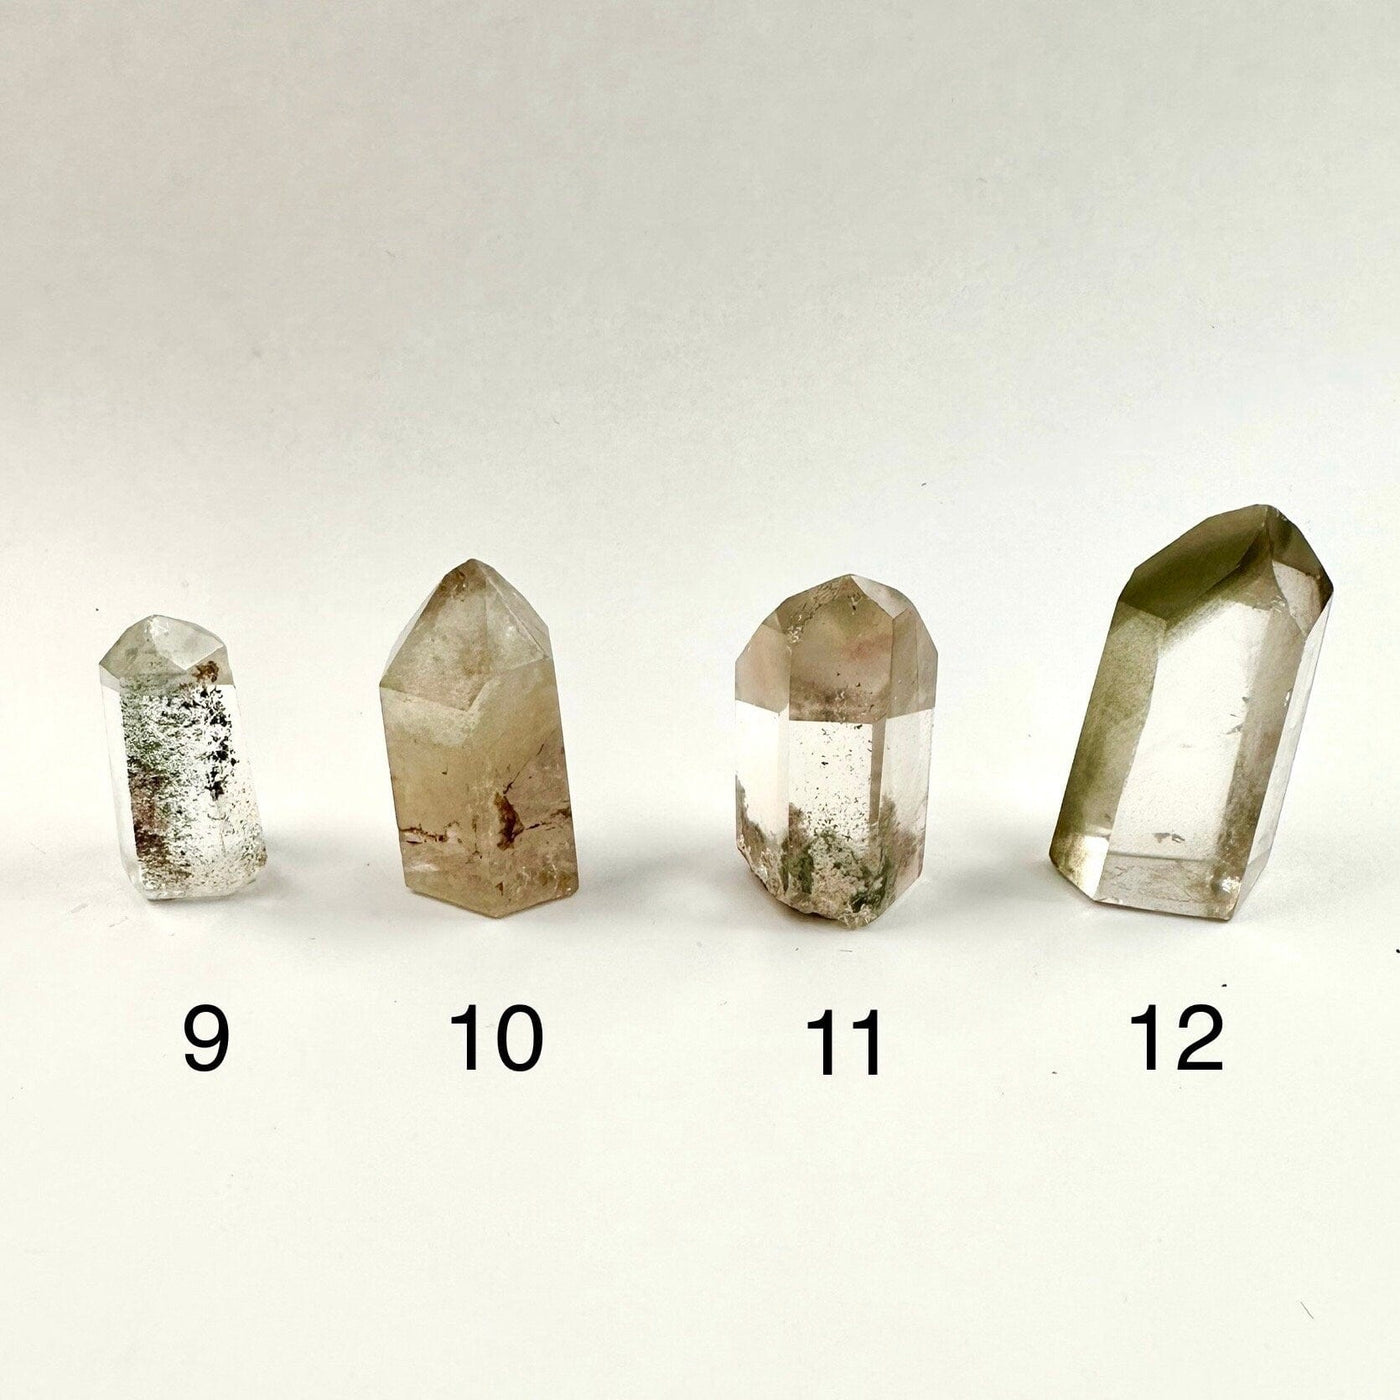 Crystal Quartz Points with Inclusions - Small Crystals - You Choose variants 9 10 11 12 labeled